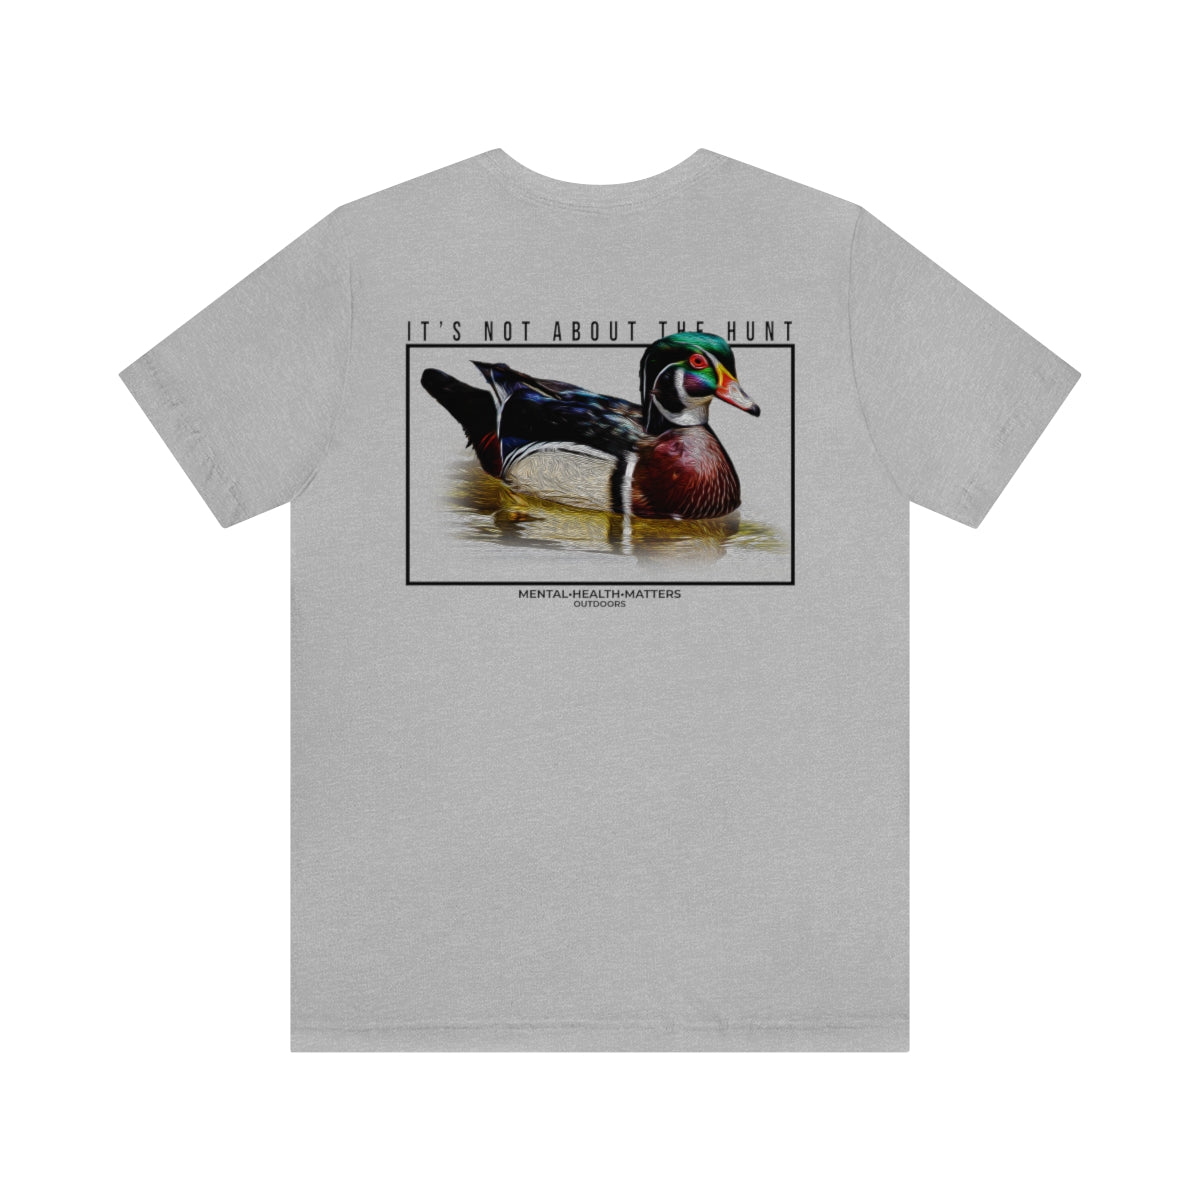 It's not about the hunt (Wood Duck)(5 Colors Available)